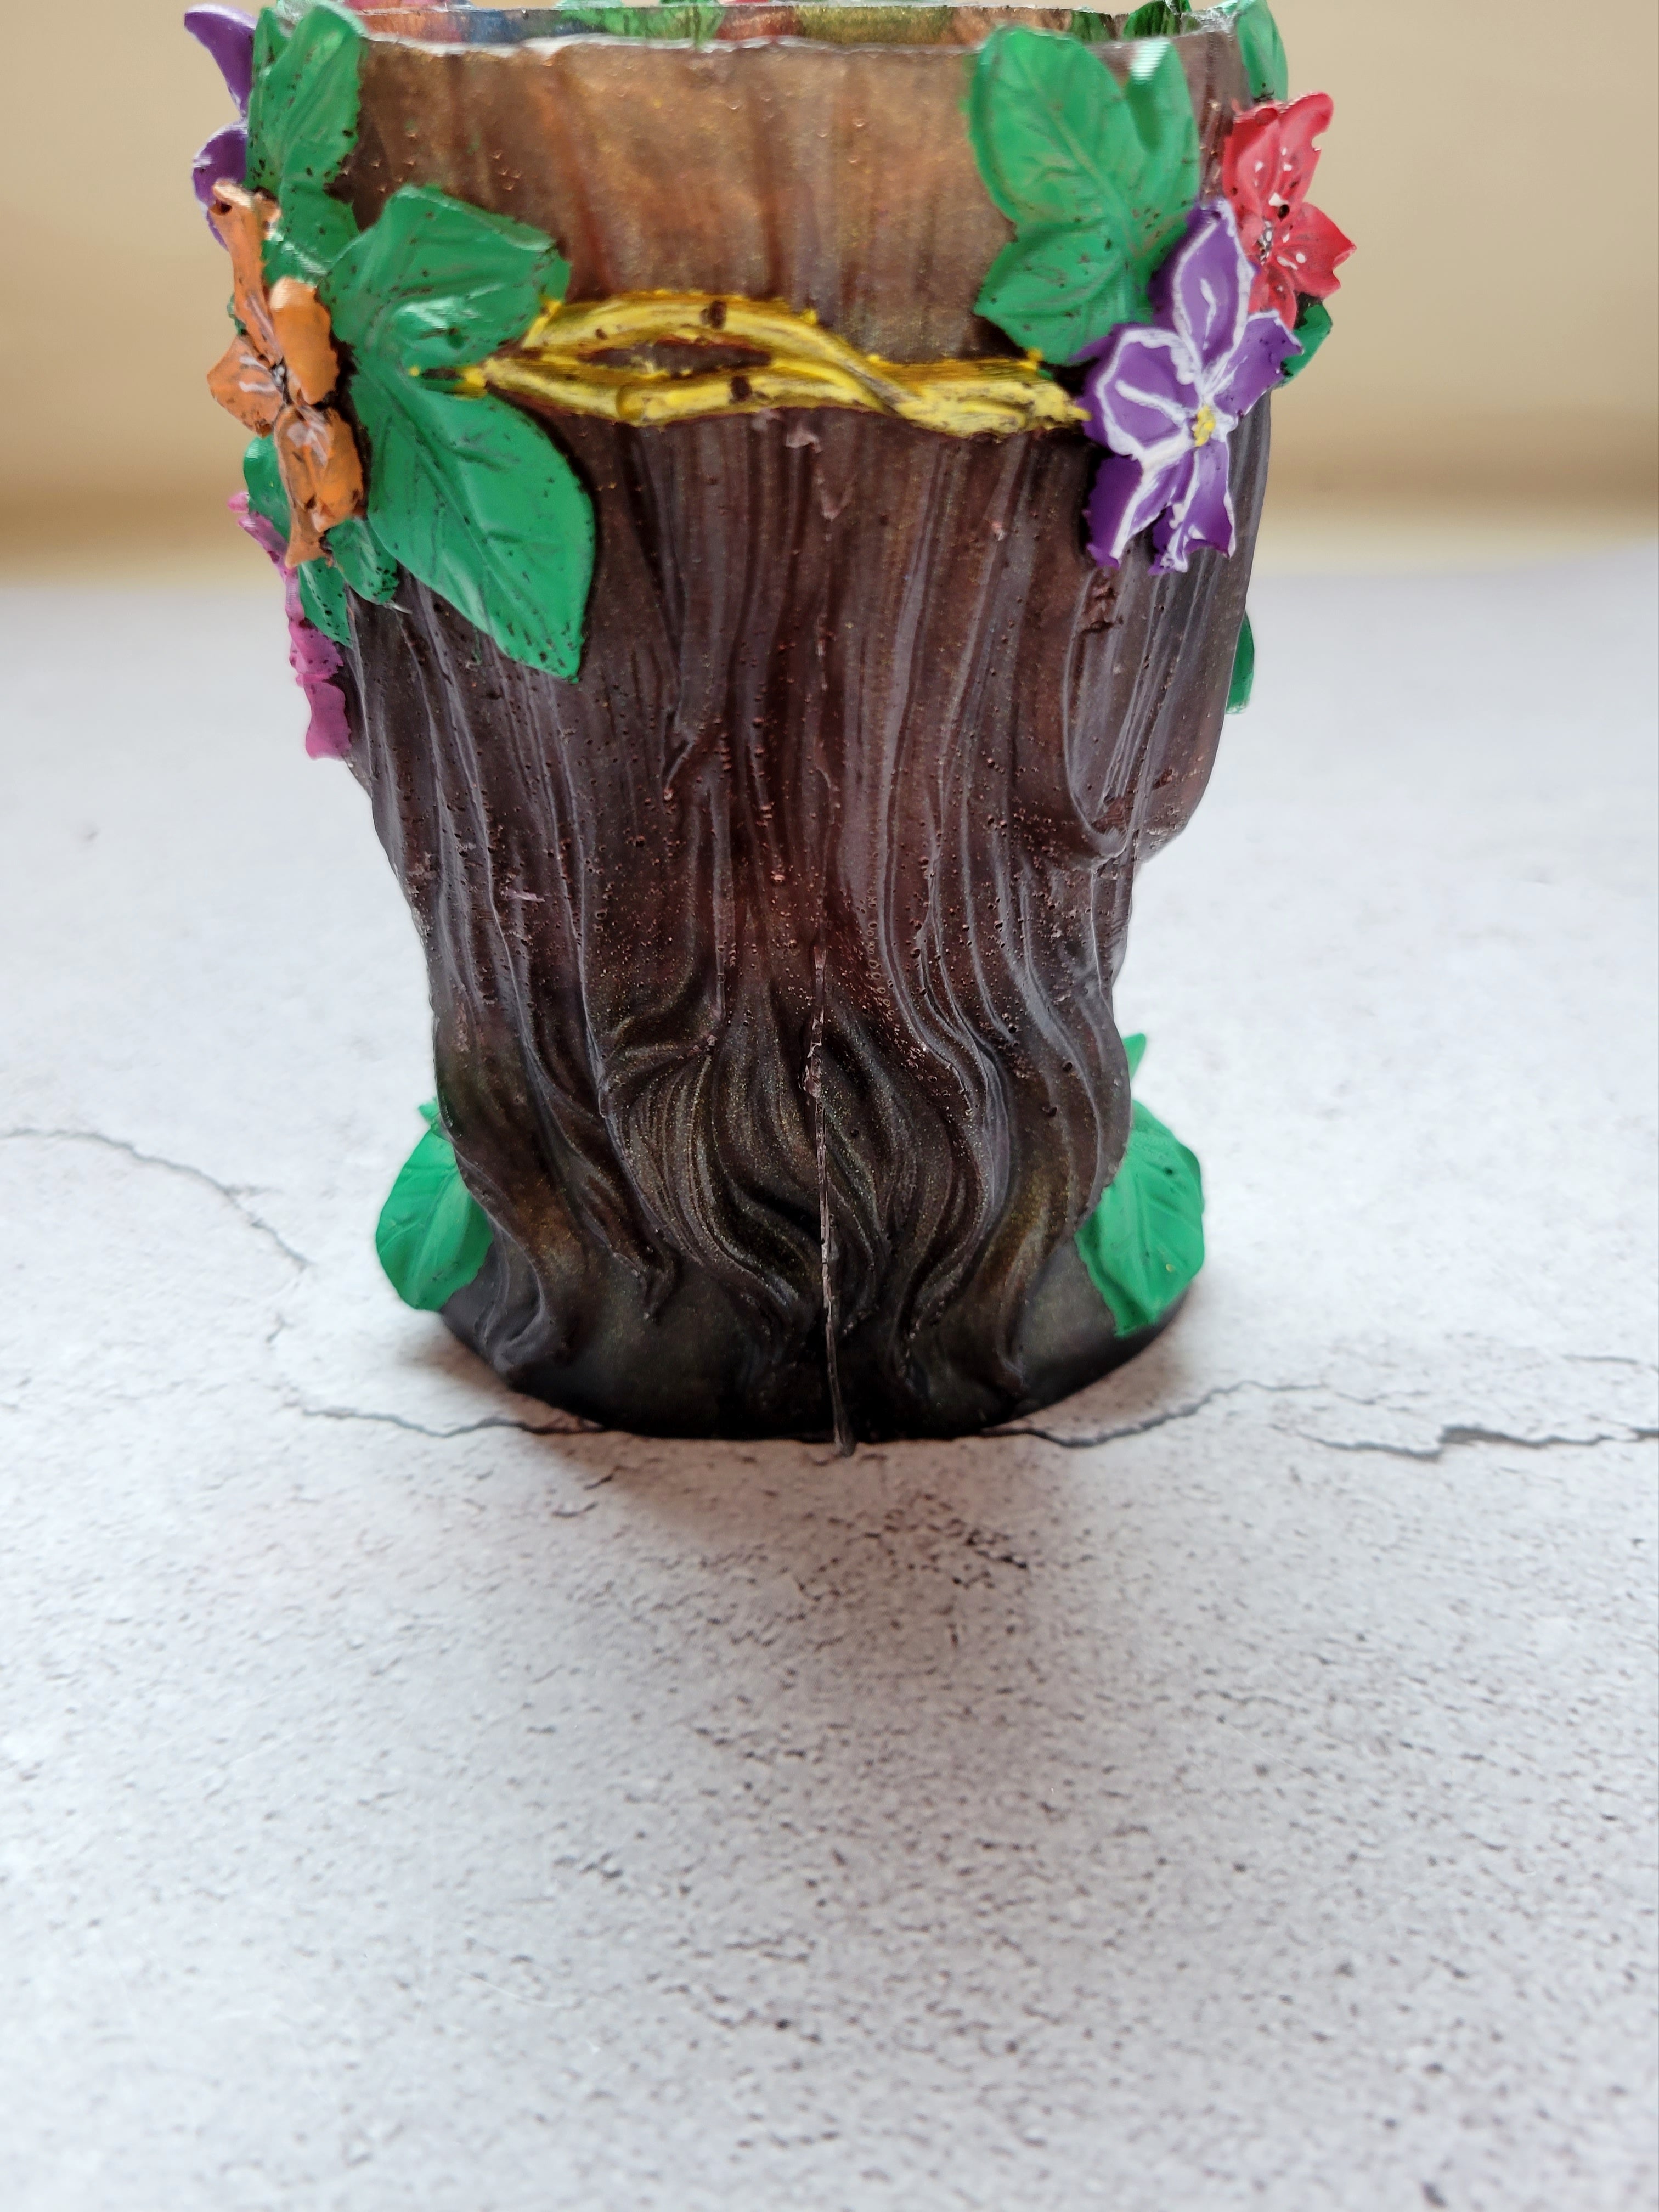 brownish bronze colored resin woman's face with green eyes, green ivy around her neck, a golden stem crown filled with colorful flowers. Back view